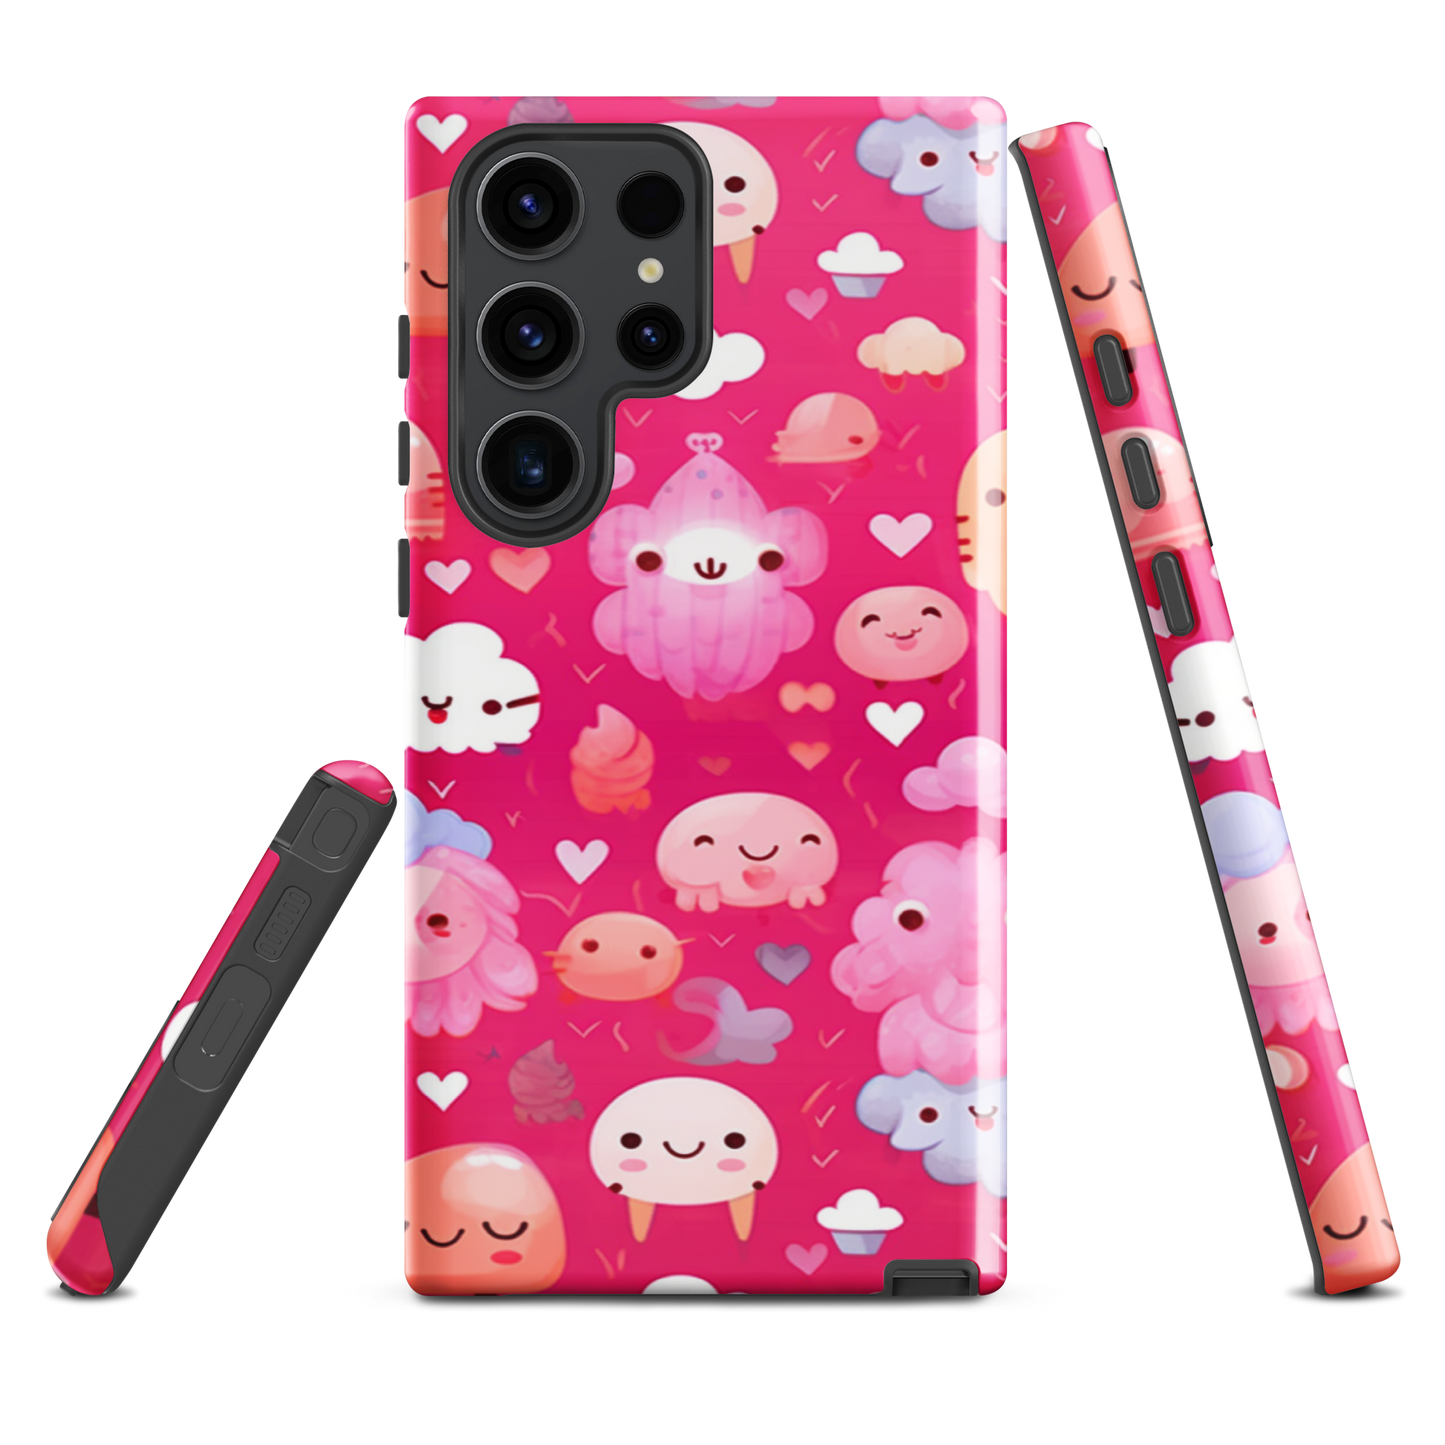 Pink and Fluffy Tough Case, Shockproof Phone Case,Cool Designed Phone Cases, Pocket-friendly